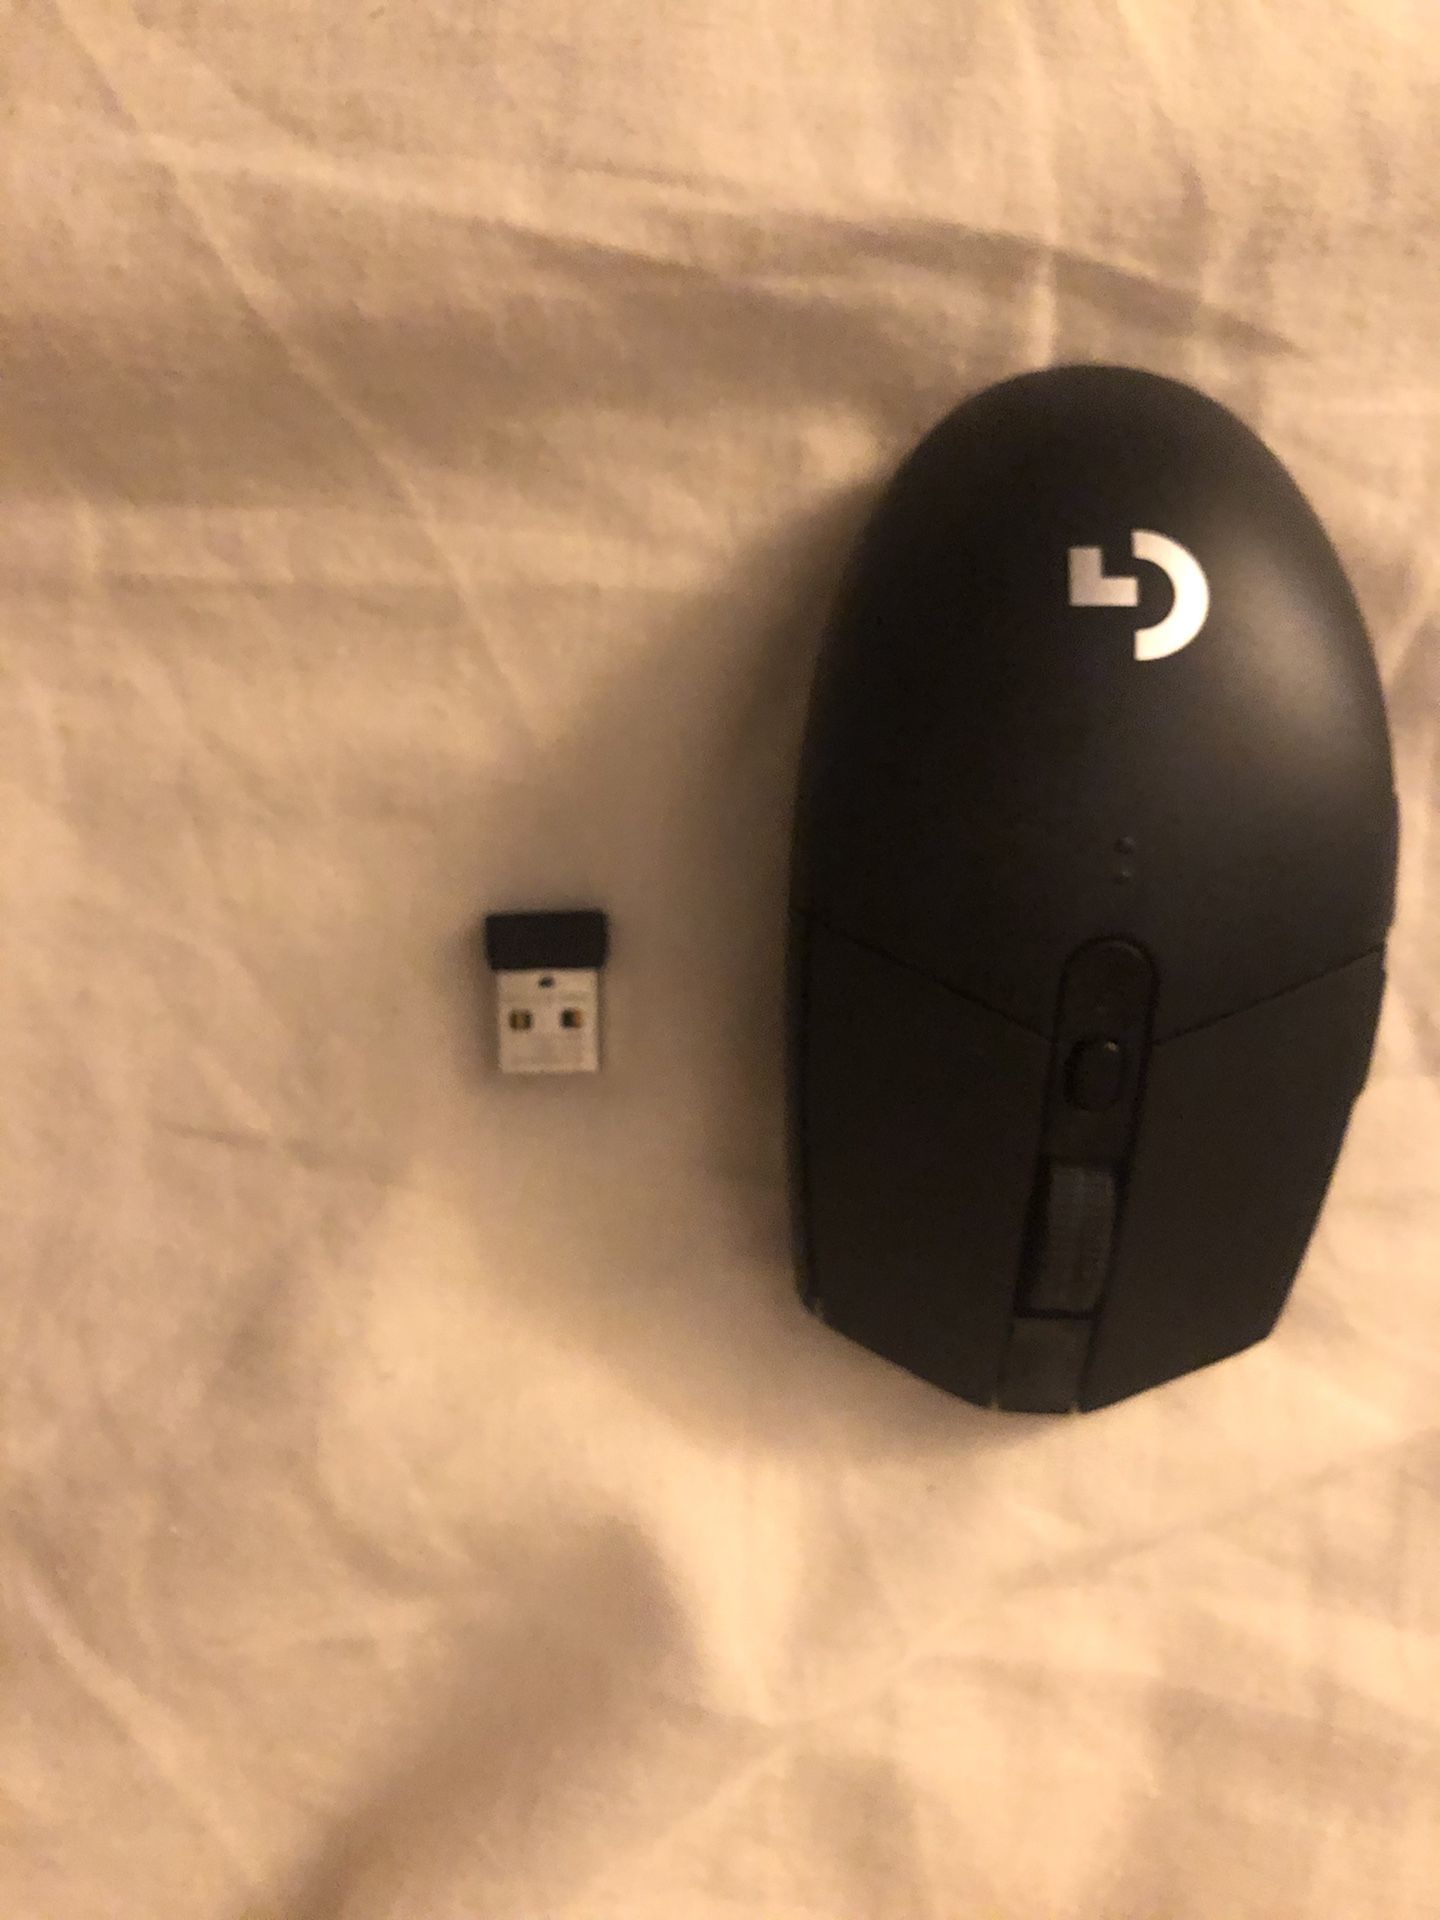 G305 wireless mouse (great condition)